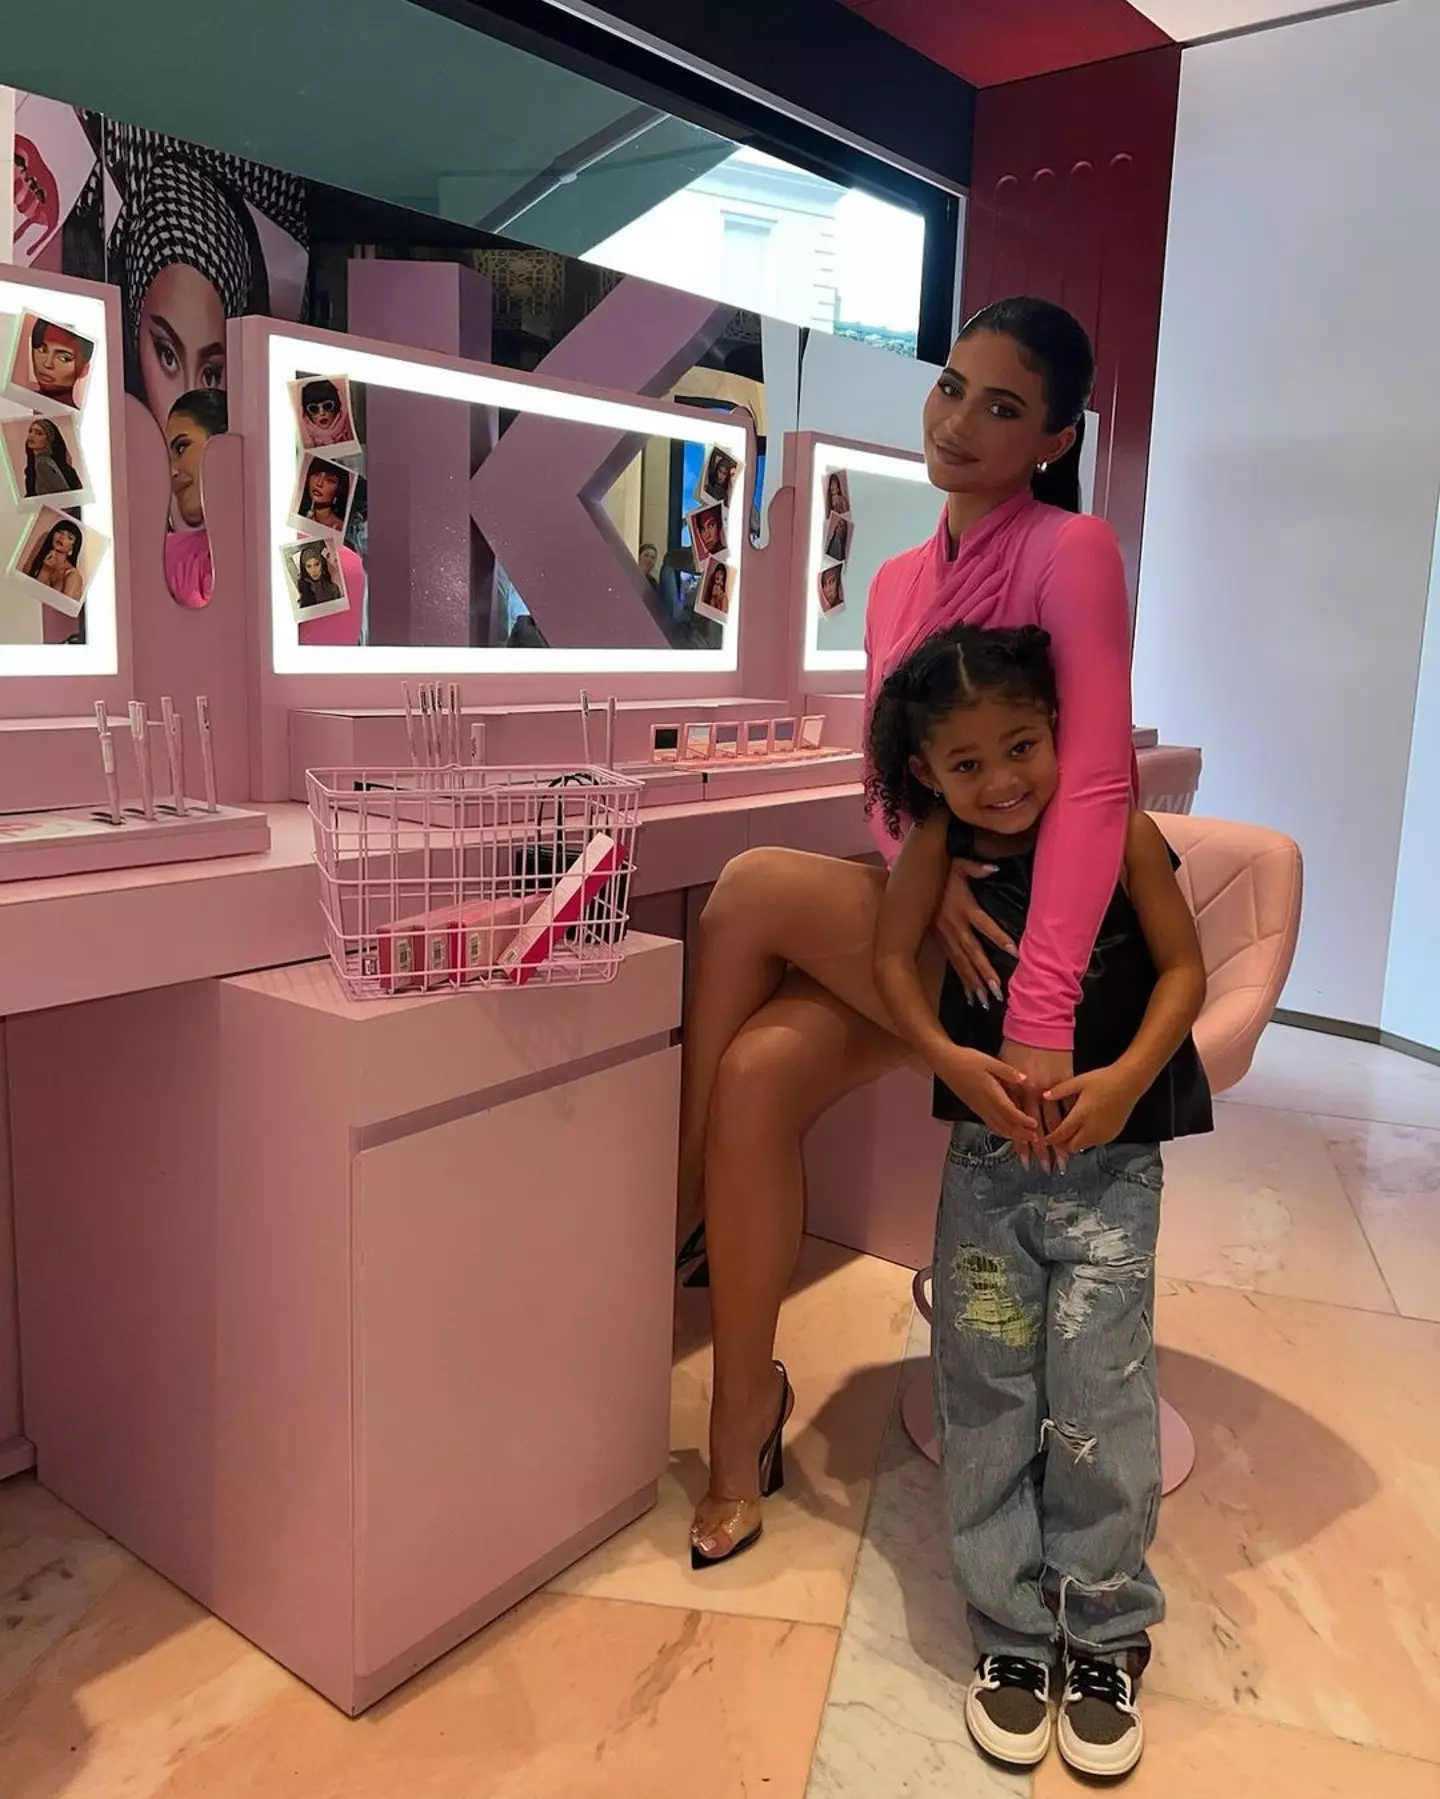 Kylie Jenner posing with her daughter, Stormi.